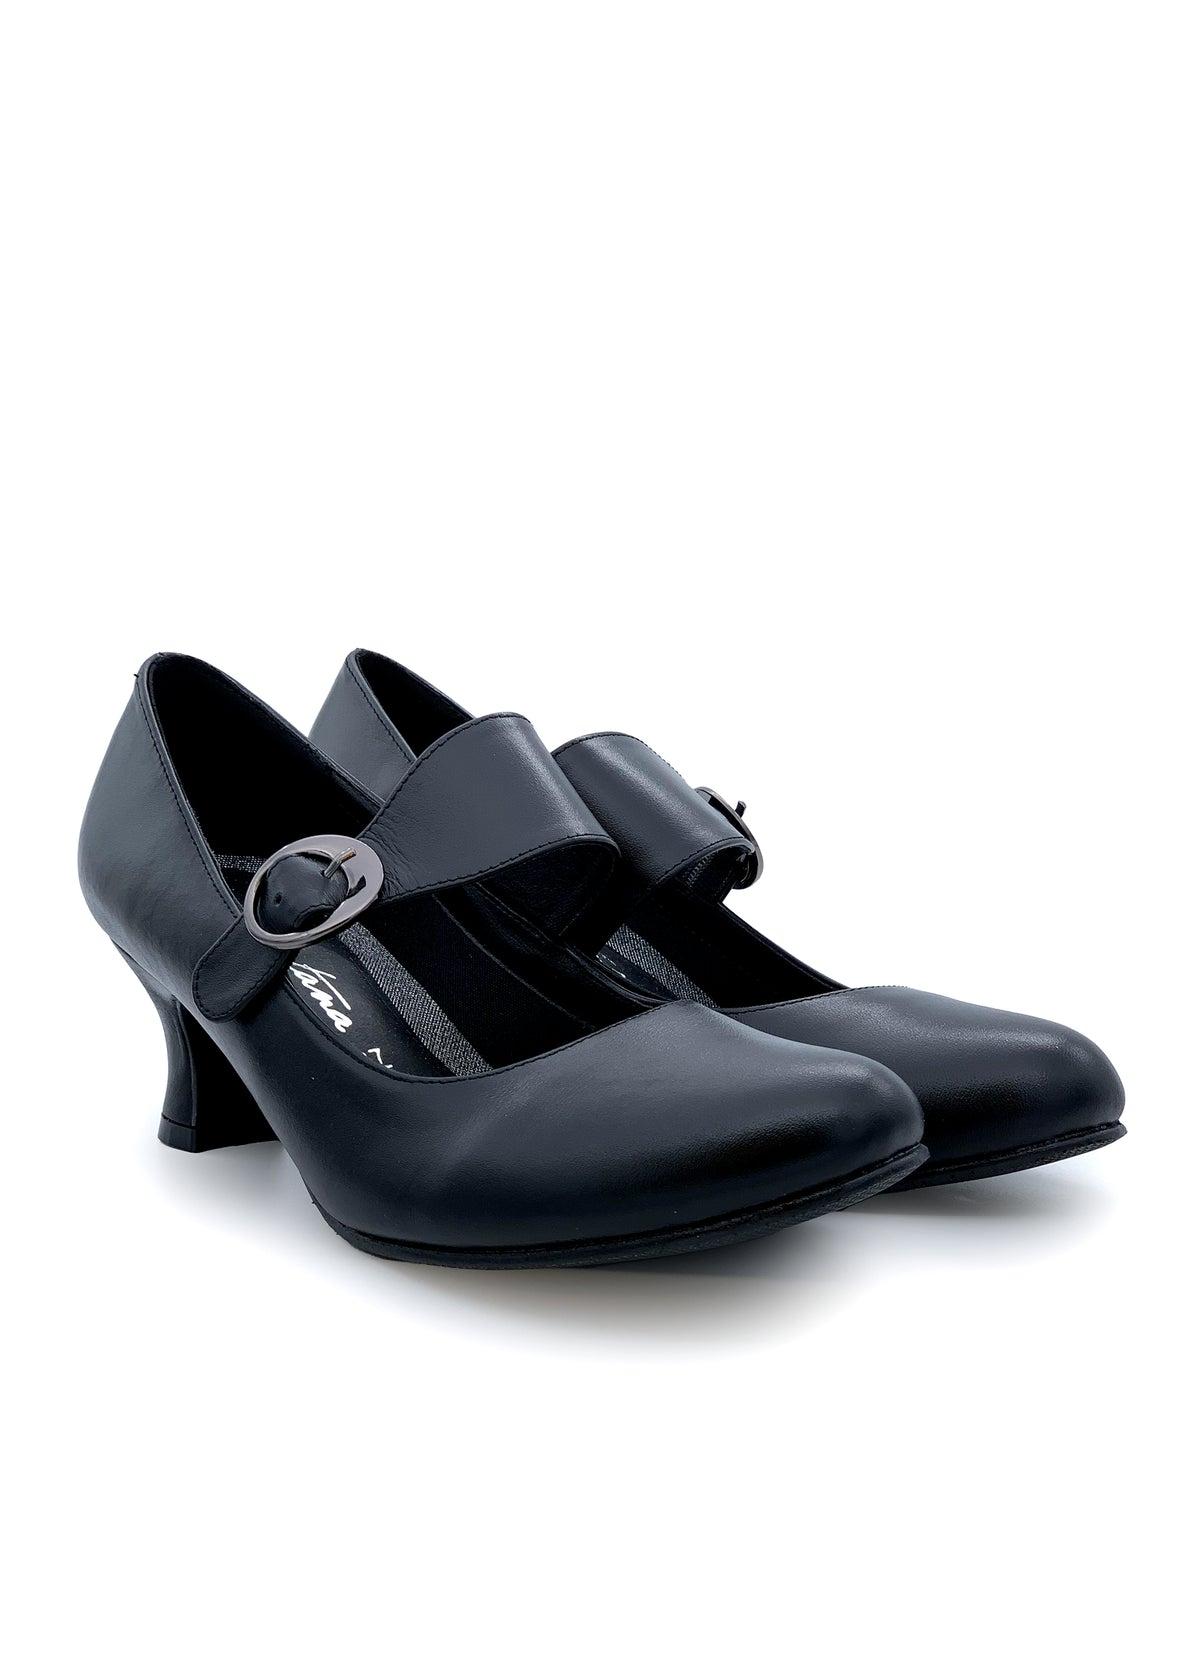 Open toe shoes with wide buckle strap - black leather